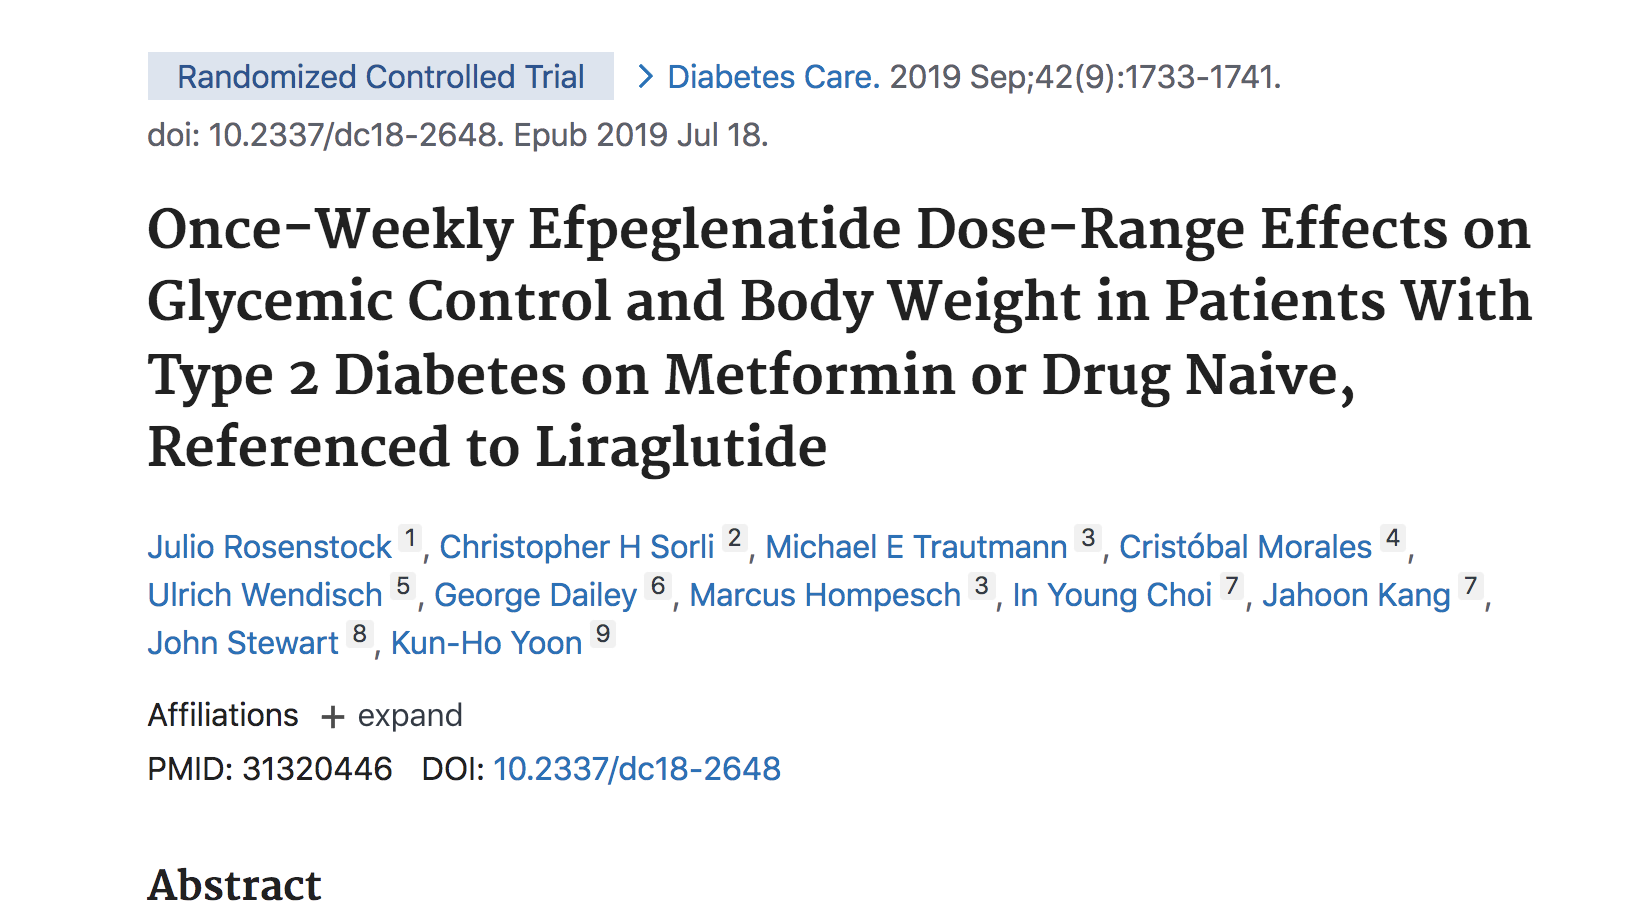 image of Once-Weekly Efpeglenatide Dose-Range Effects on Glycemic Control and Body Weight in Patients With Type 2 Diabetes on Metformin or Drug Naive, Referenced to Liraglutide